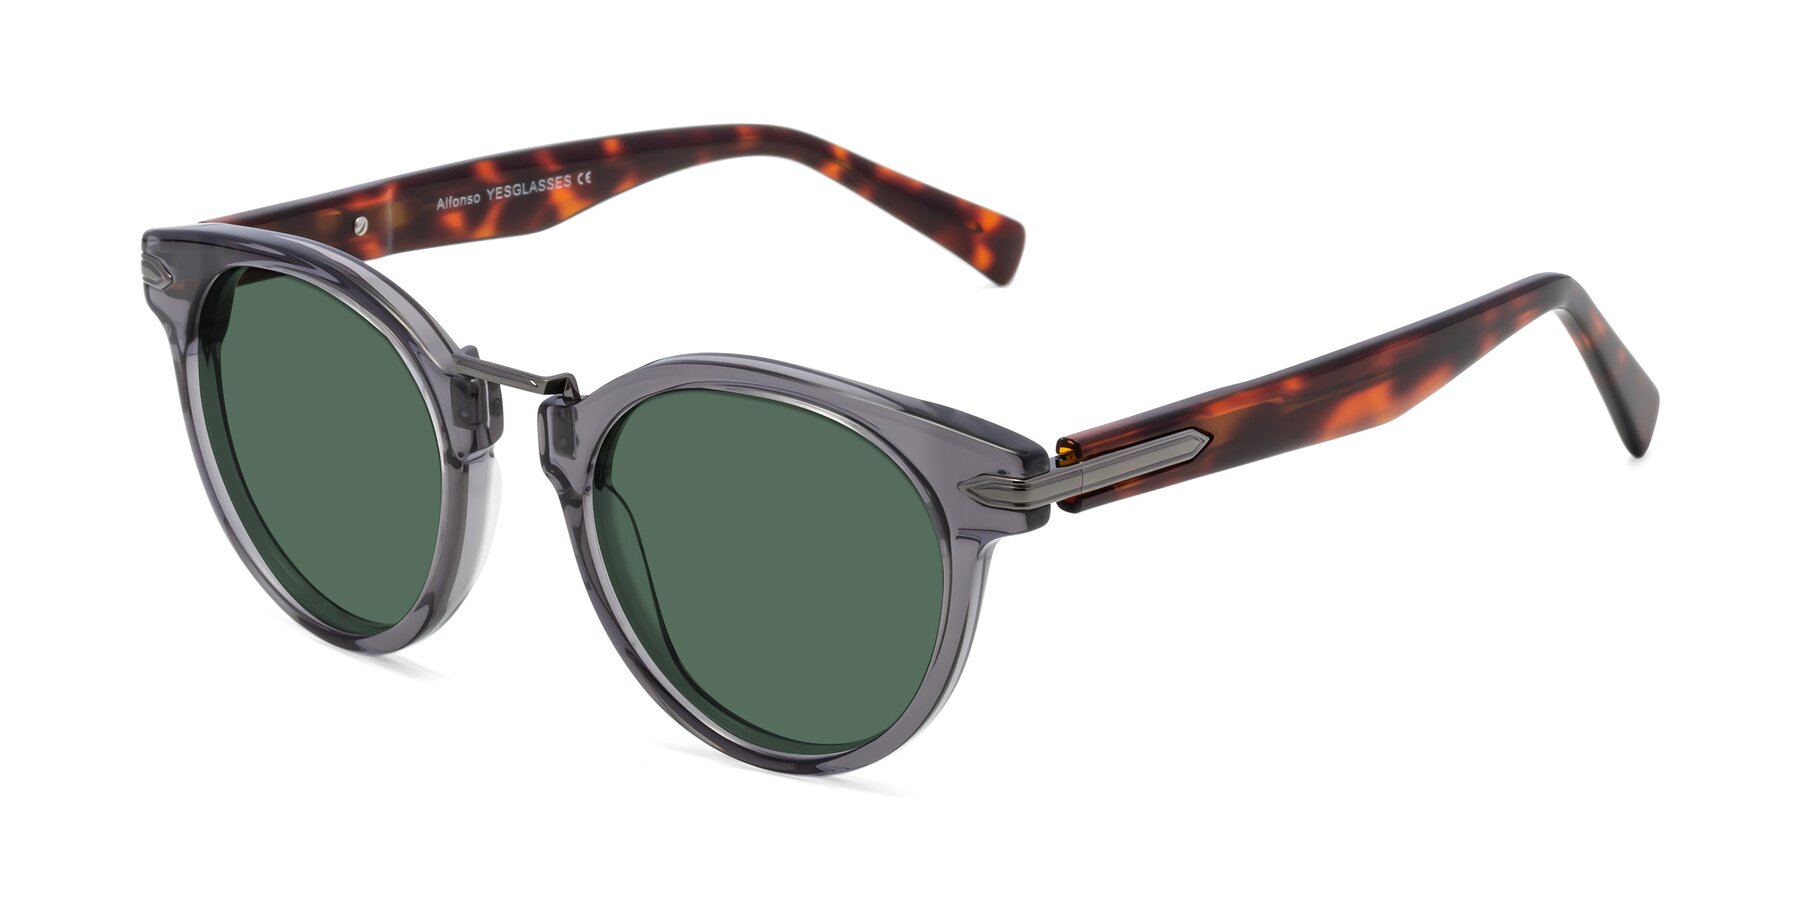 Angle of Alfonso in Gray /Tortoise with Green Polarized Lenses